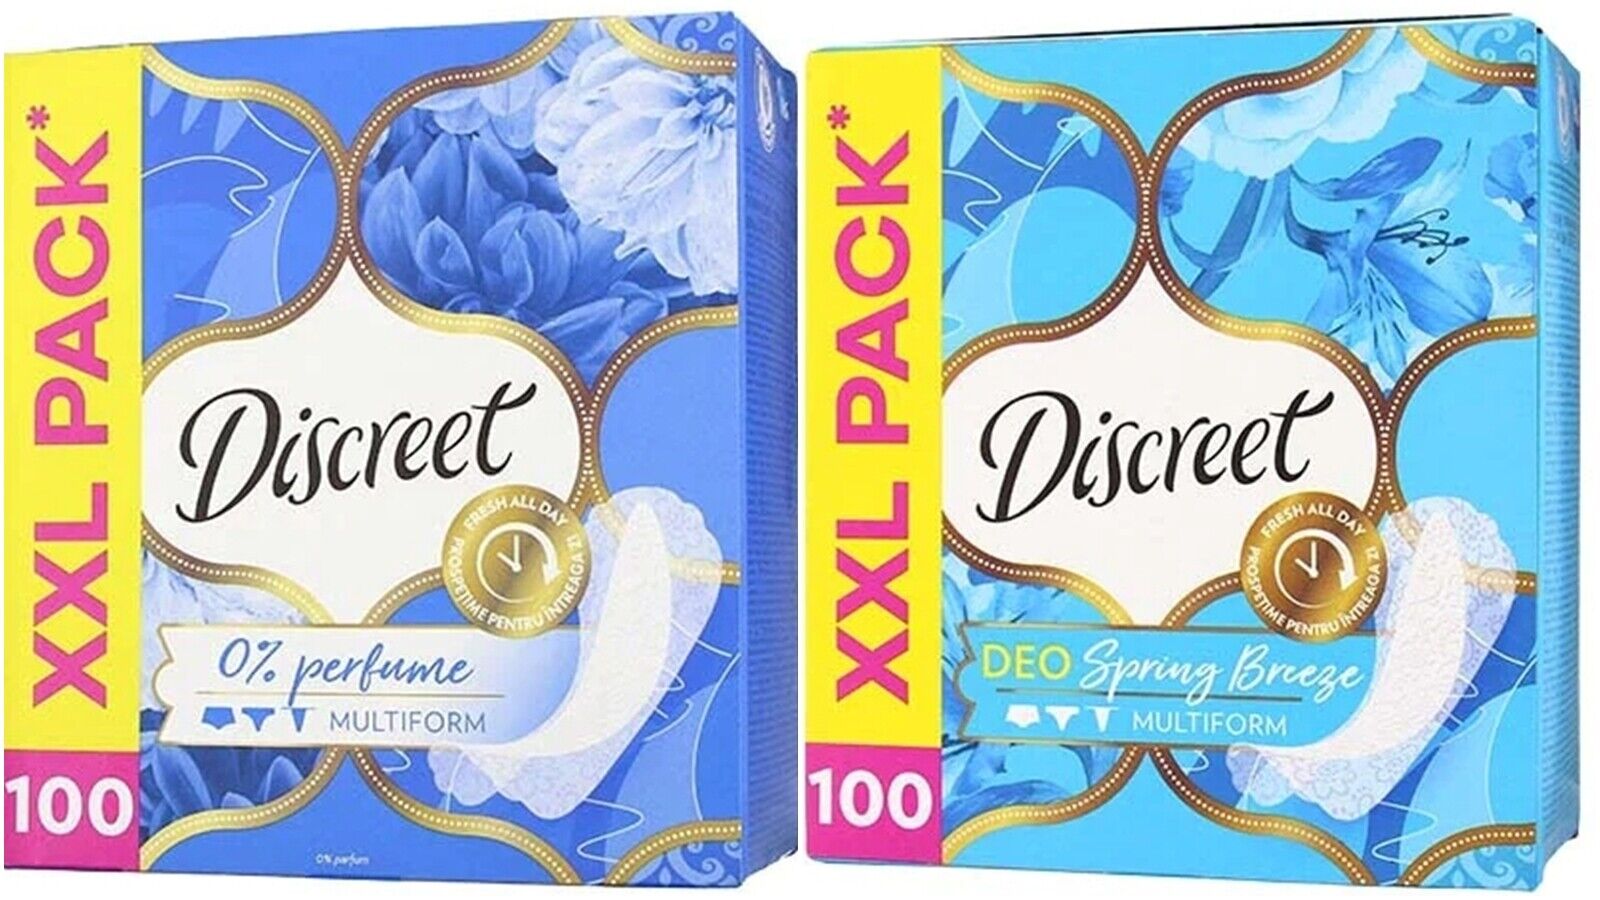 Discreet Dailies Panty Liners, 100 Pieces.